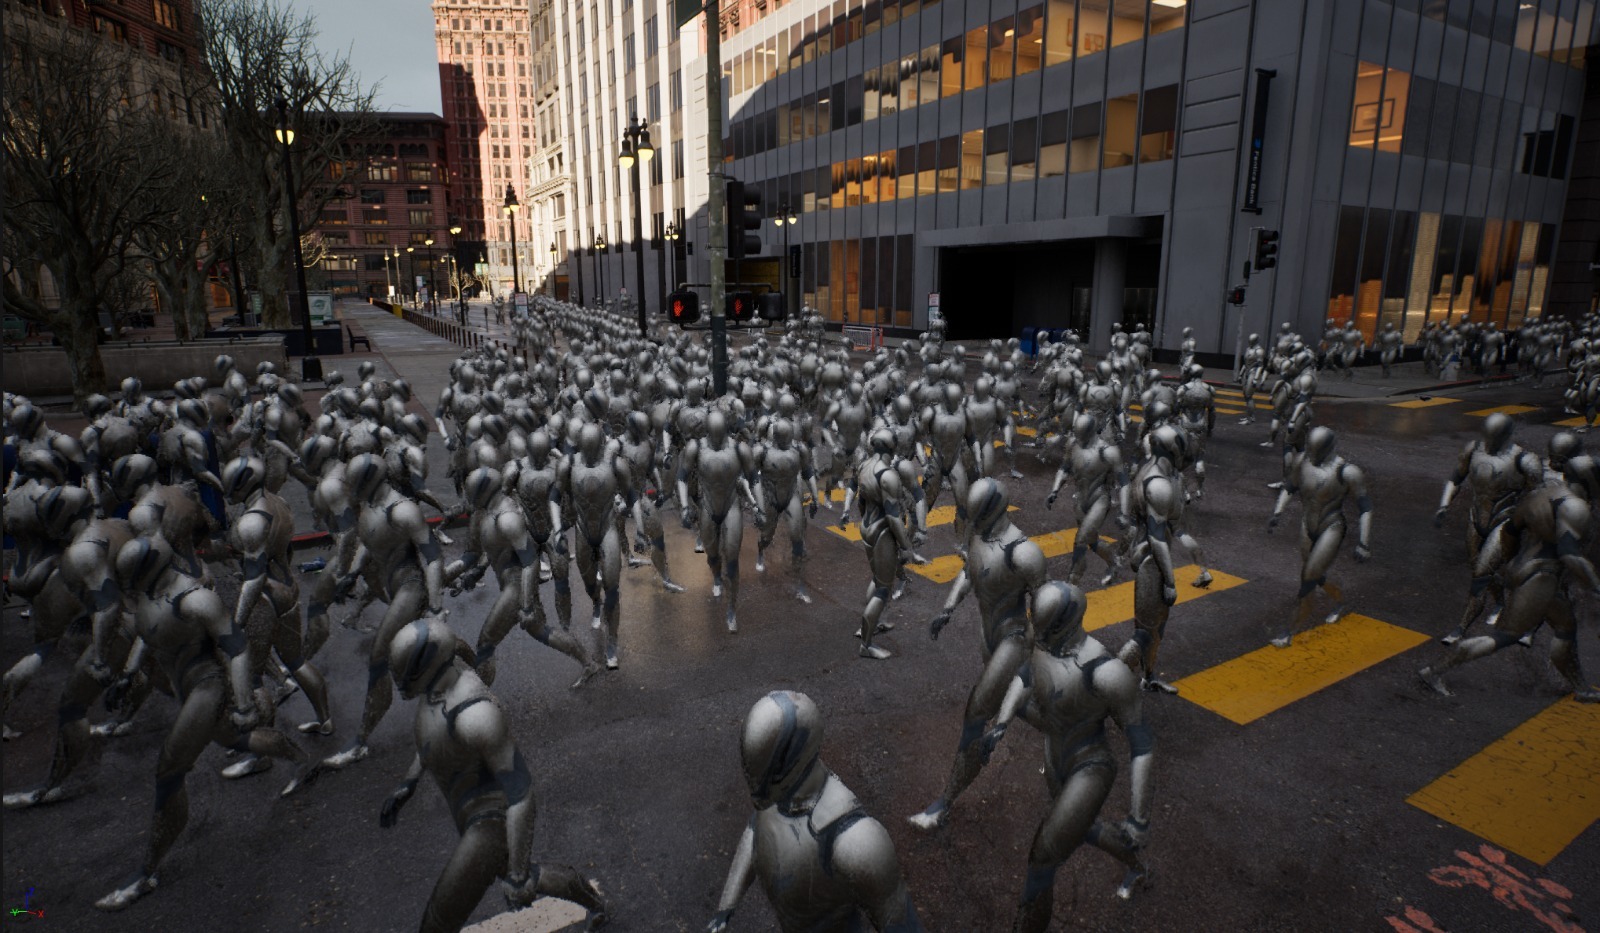 Realism and control - Unreal engine Crowd simulation plugin image